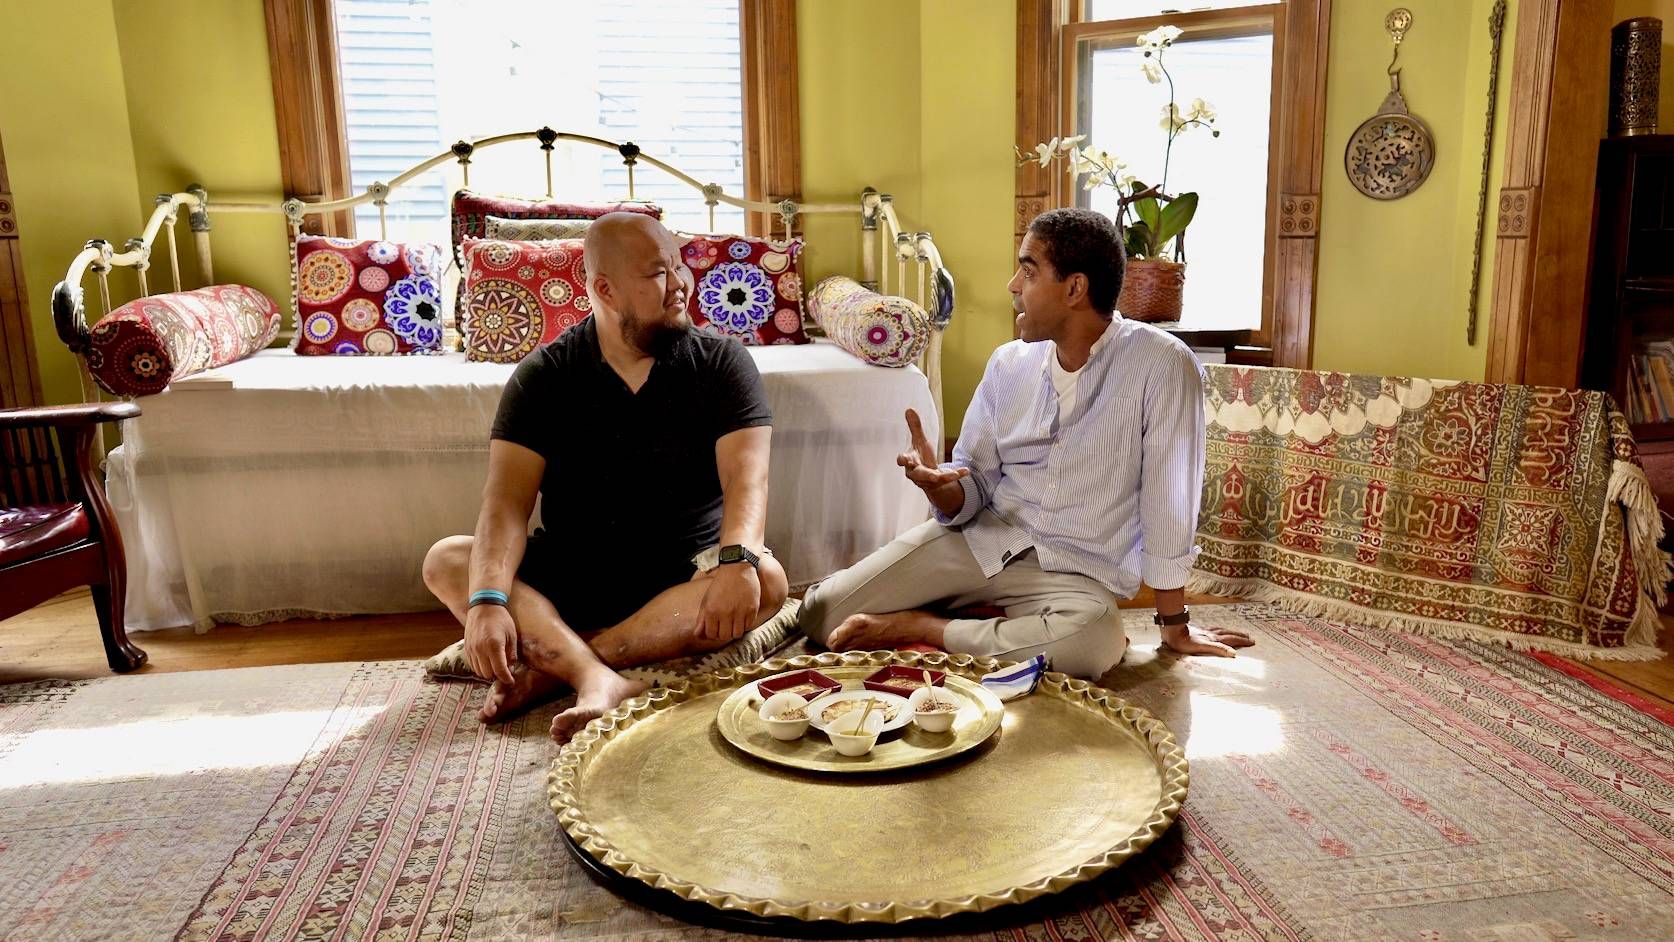 Yia Vang and Mo Kotb sitting on pillows talking around a platter of dukkah, pita and olive oil.
